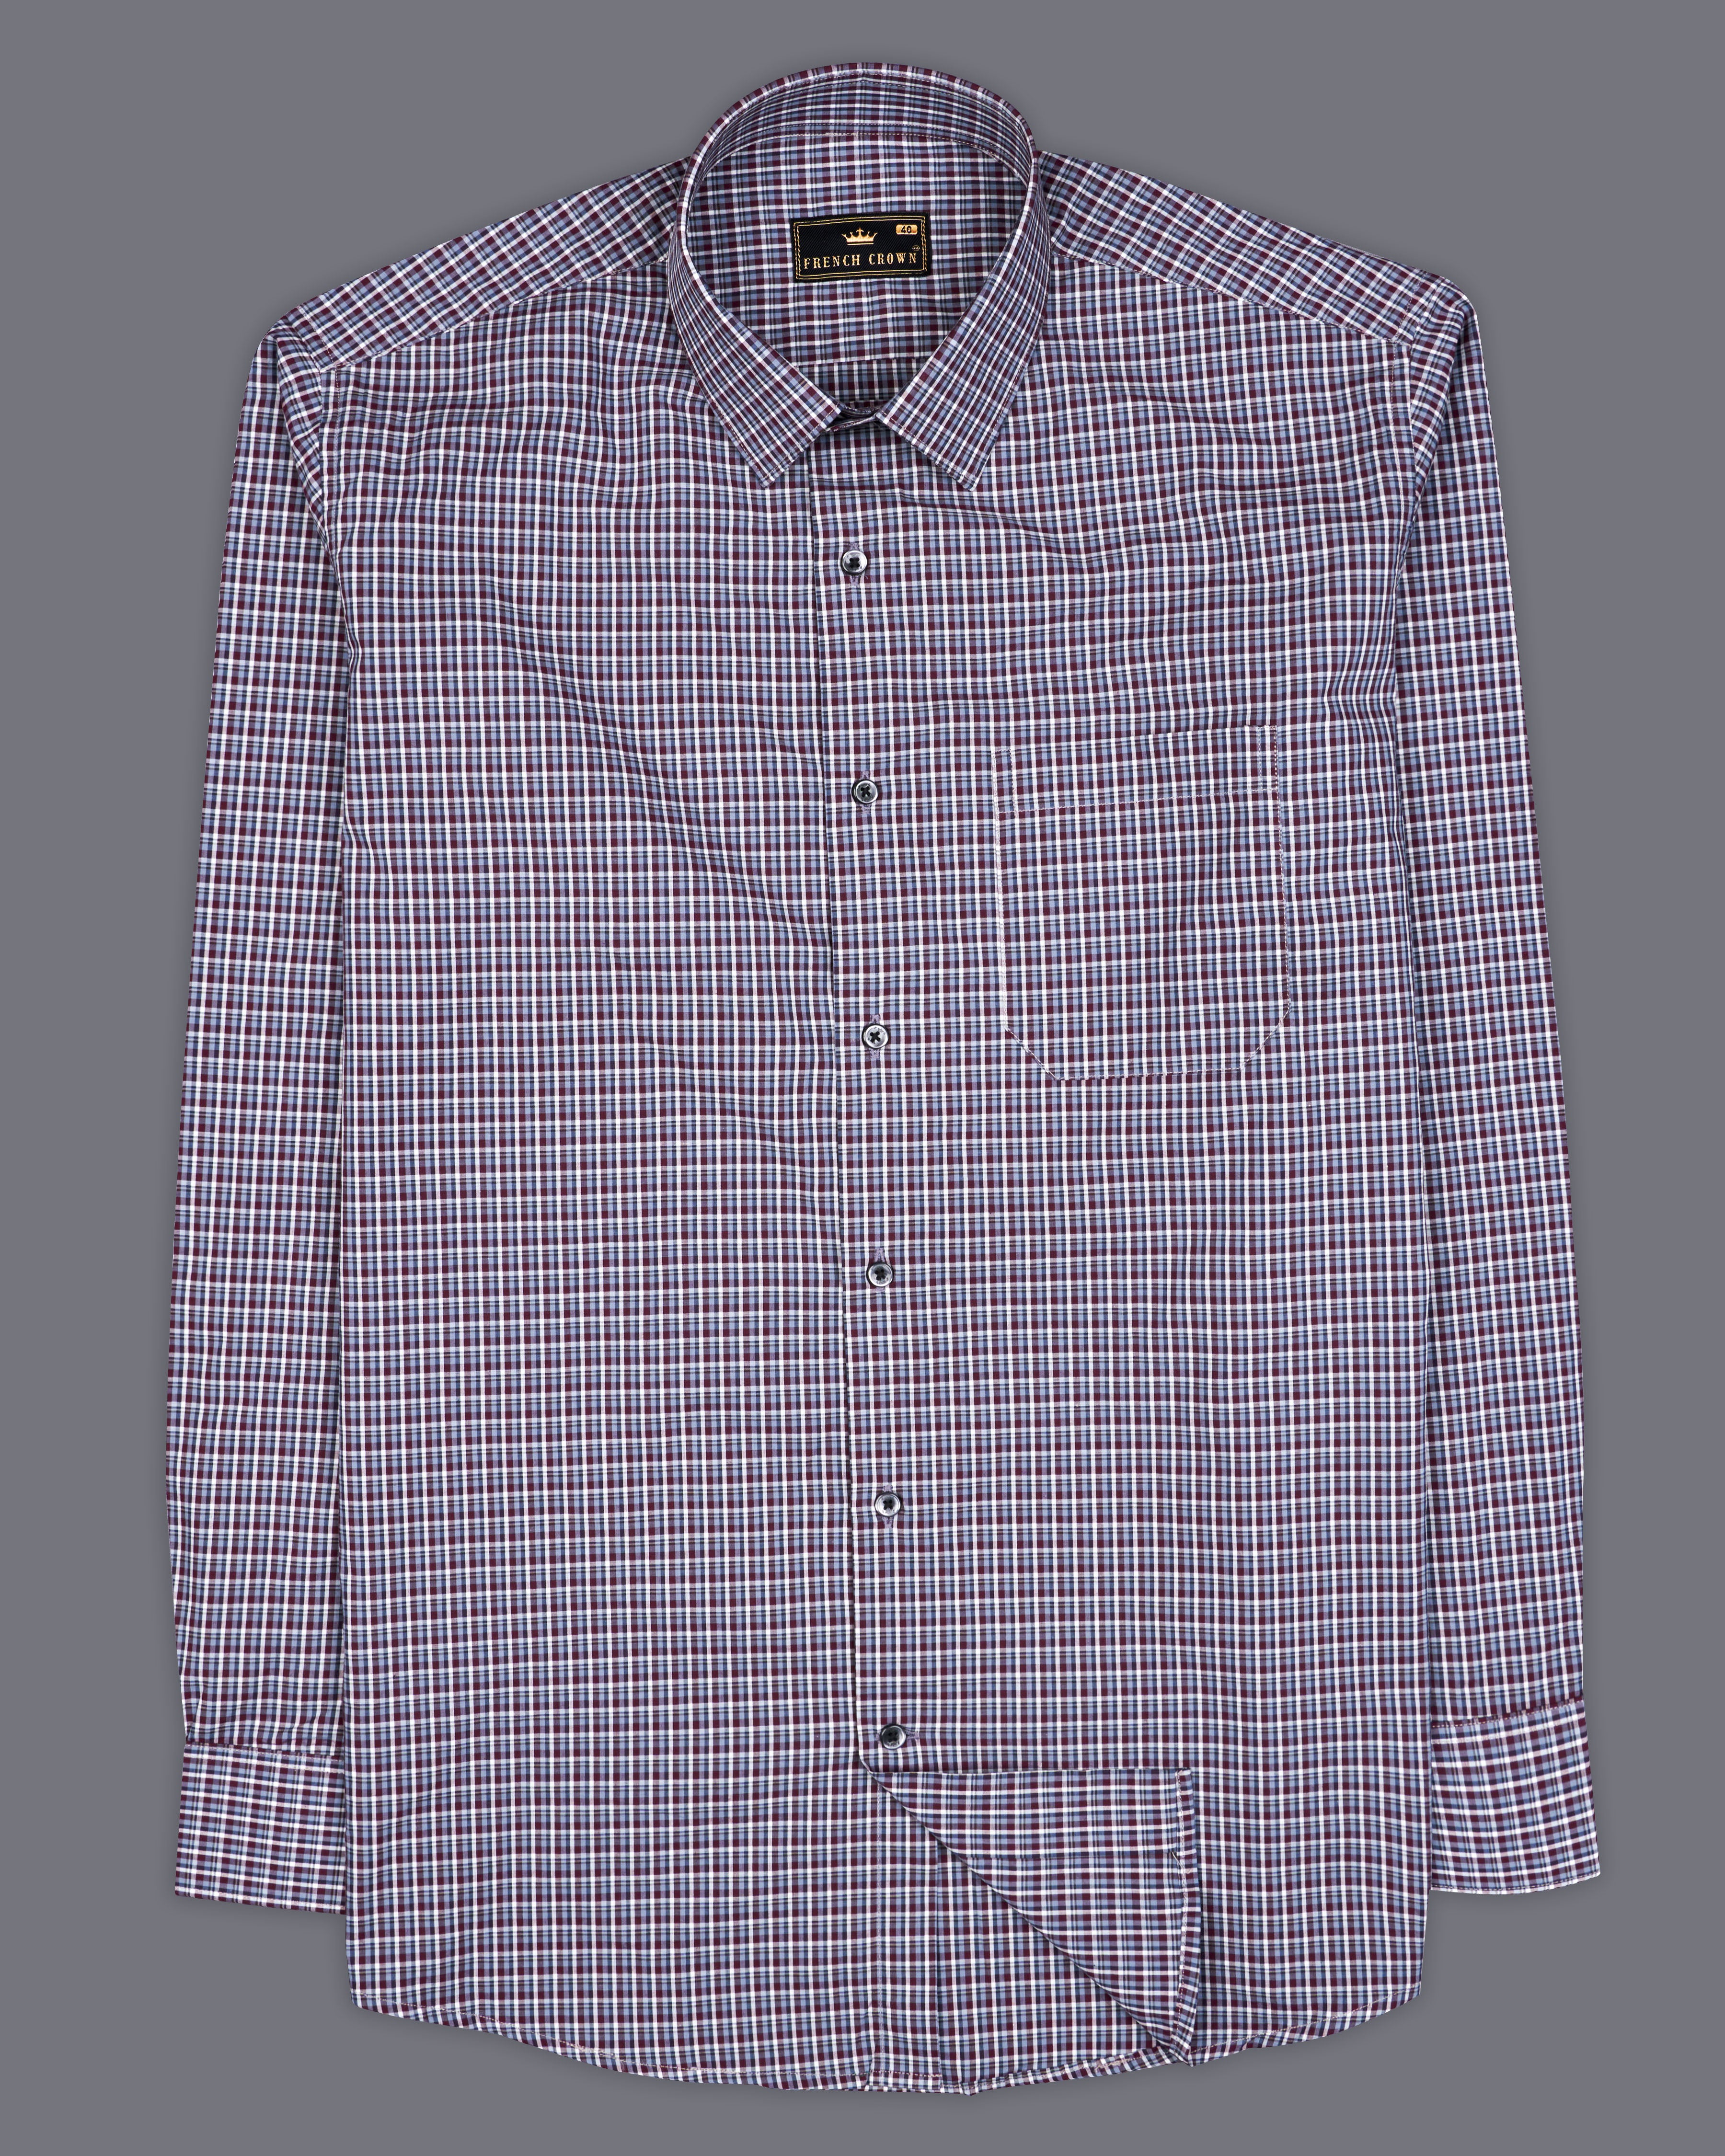 Castro Maroon with Thunder Blue and White Checkered Premium Cotton Shirt 9379-BLK-38, 9379-BLK-H-38, 9379-BLK-39, 9379-BLK-H-39, 9379-BLK-40, 9379-BLK-H-40, 9379-BLK-42, 9379-BLK-H-42, 9379-BLK-44, 9379-BLK-H-44, 9379-BLK-46, 9379-BLK-H-46, 9379-BLK-48, 9379-BLK-H-48, 9379-BLK-50, 9379-BLK-H-50, 9379-BLK-52, 9379-BLK-H-52